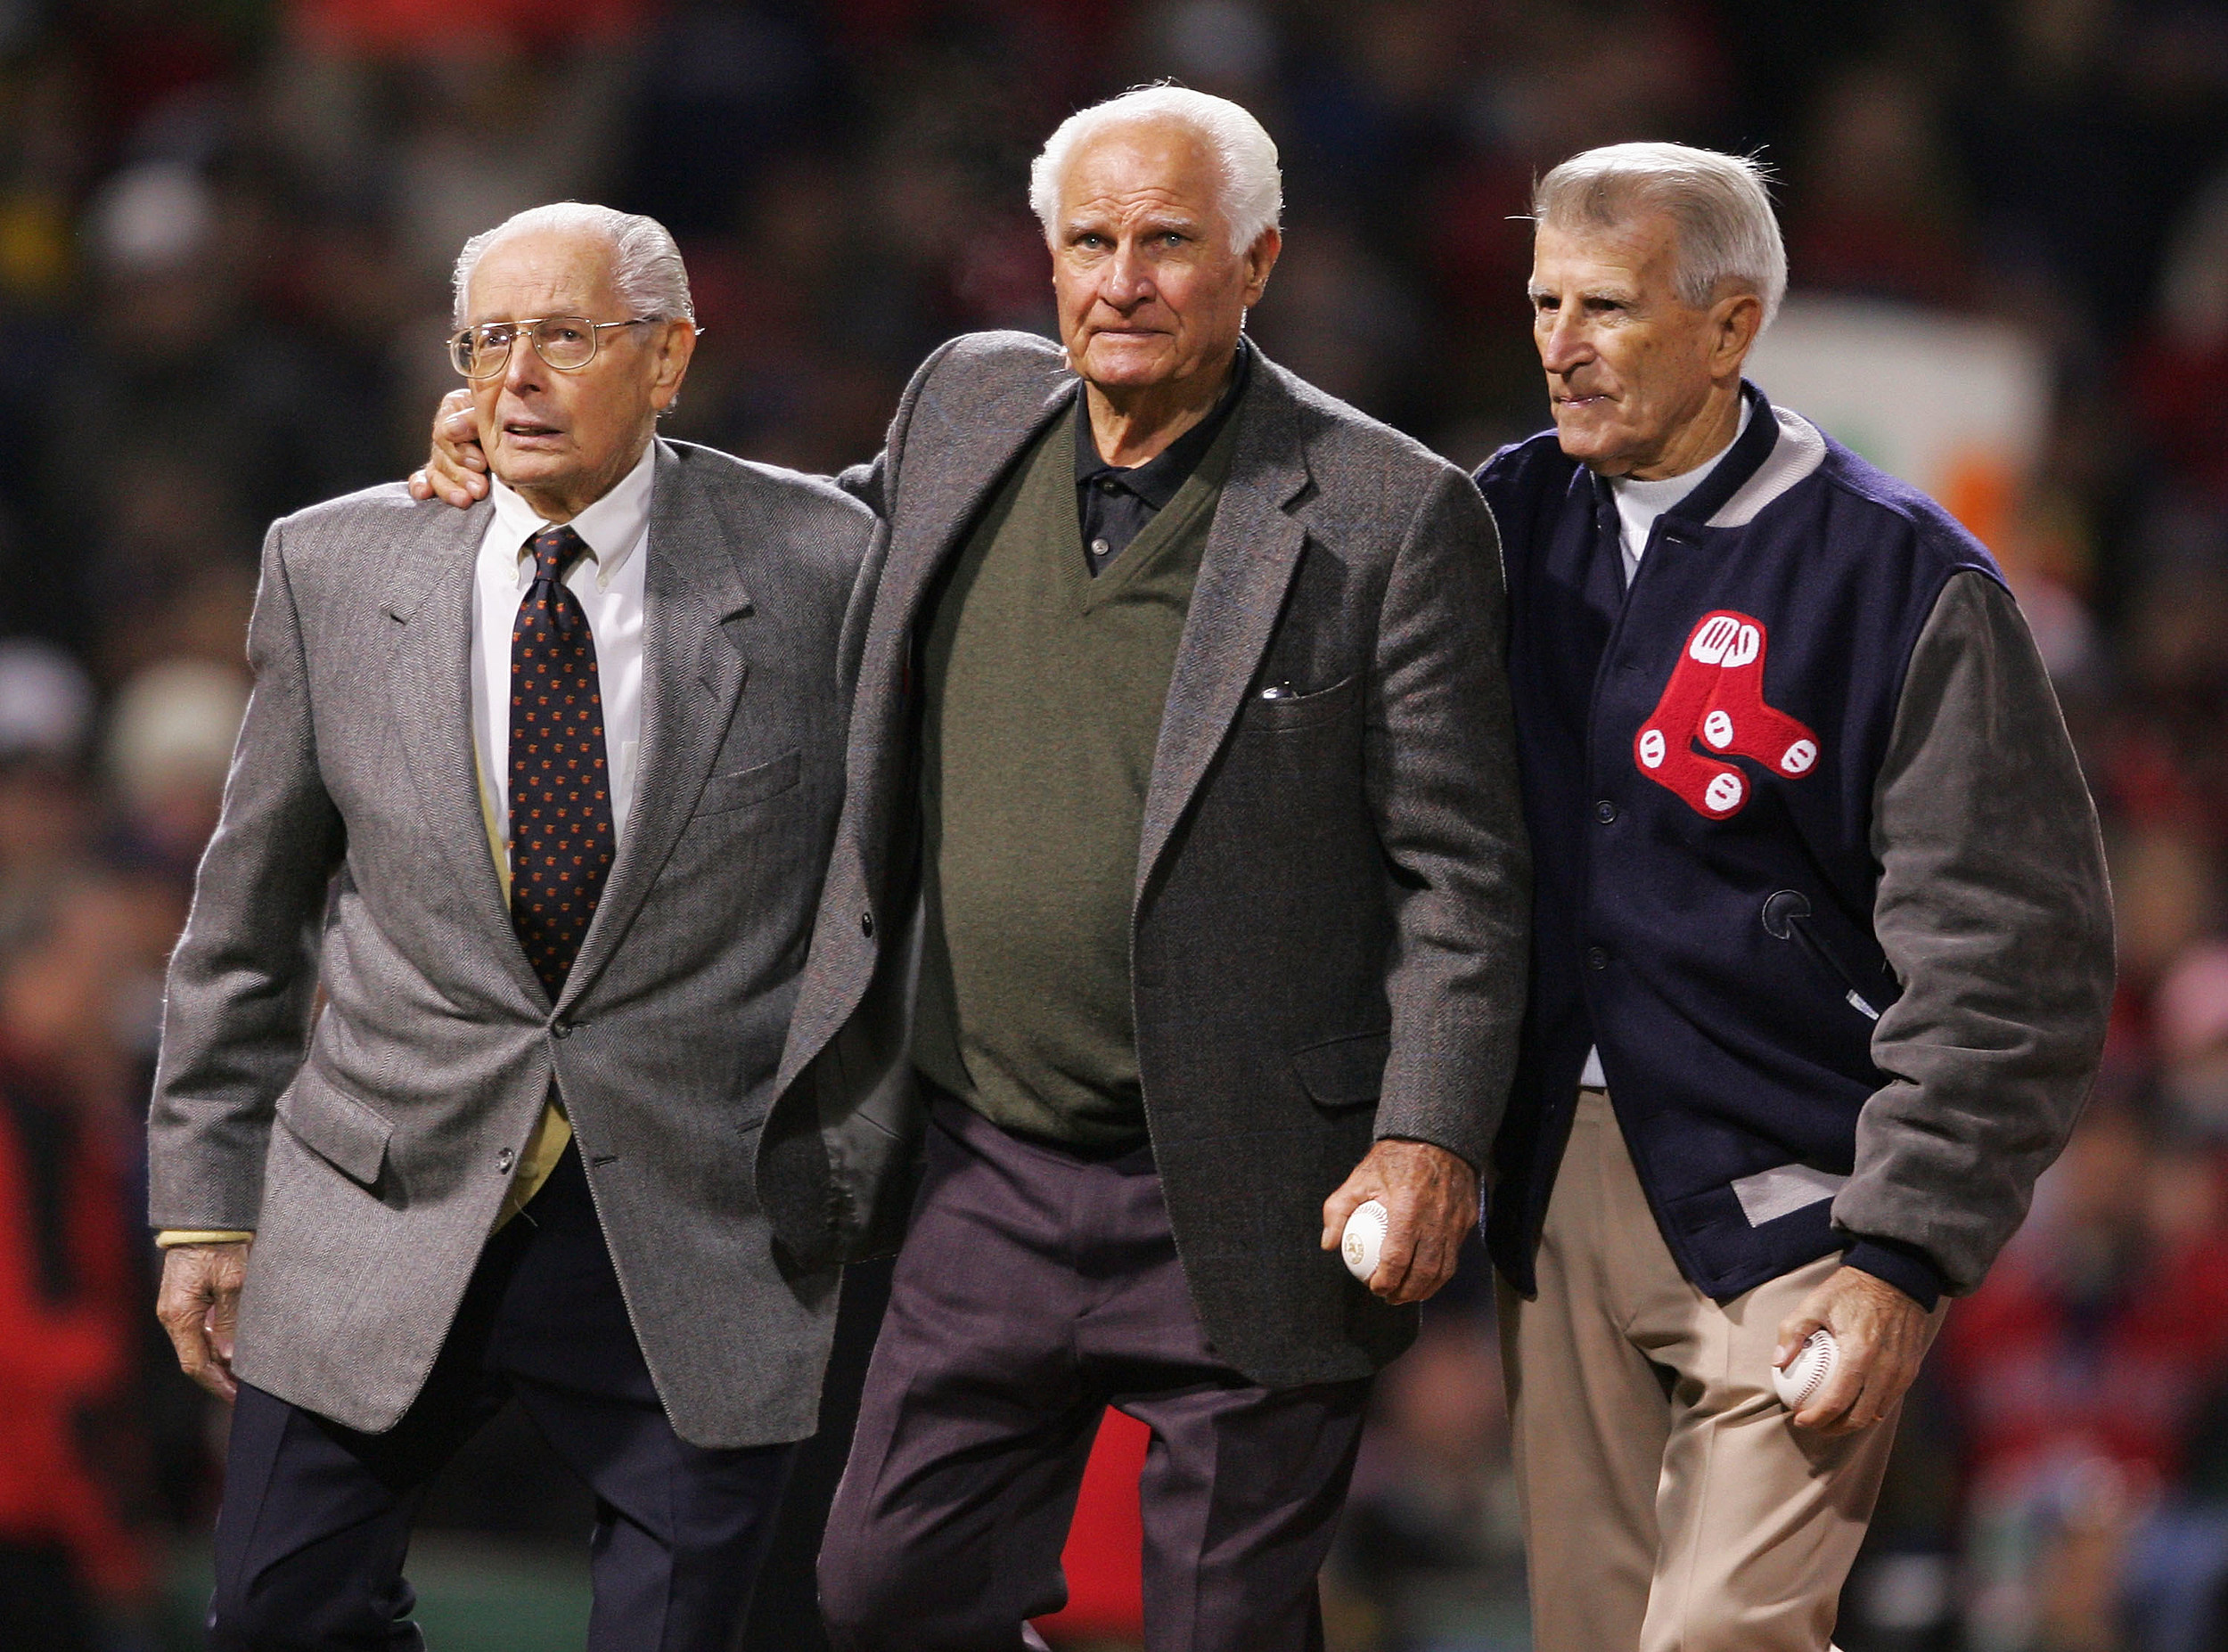 Bobby Doerr, Hall of Fame Red Sox second baseman, dies at 99